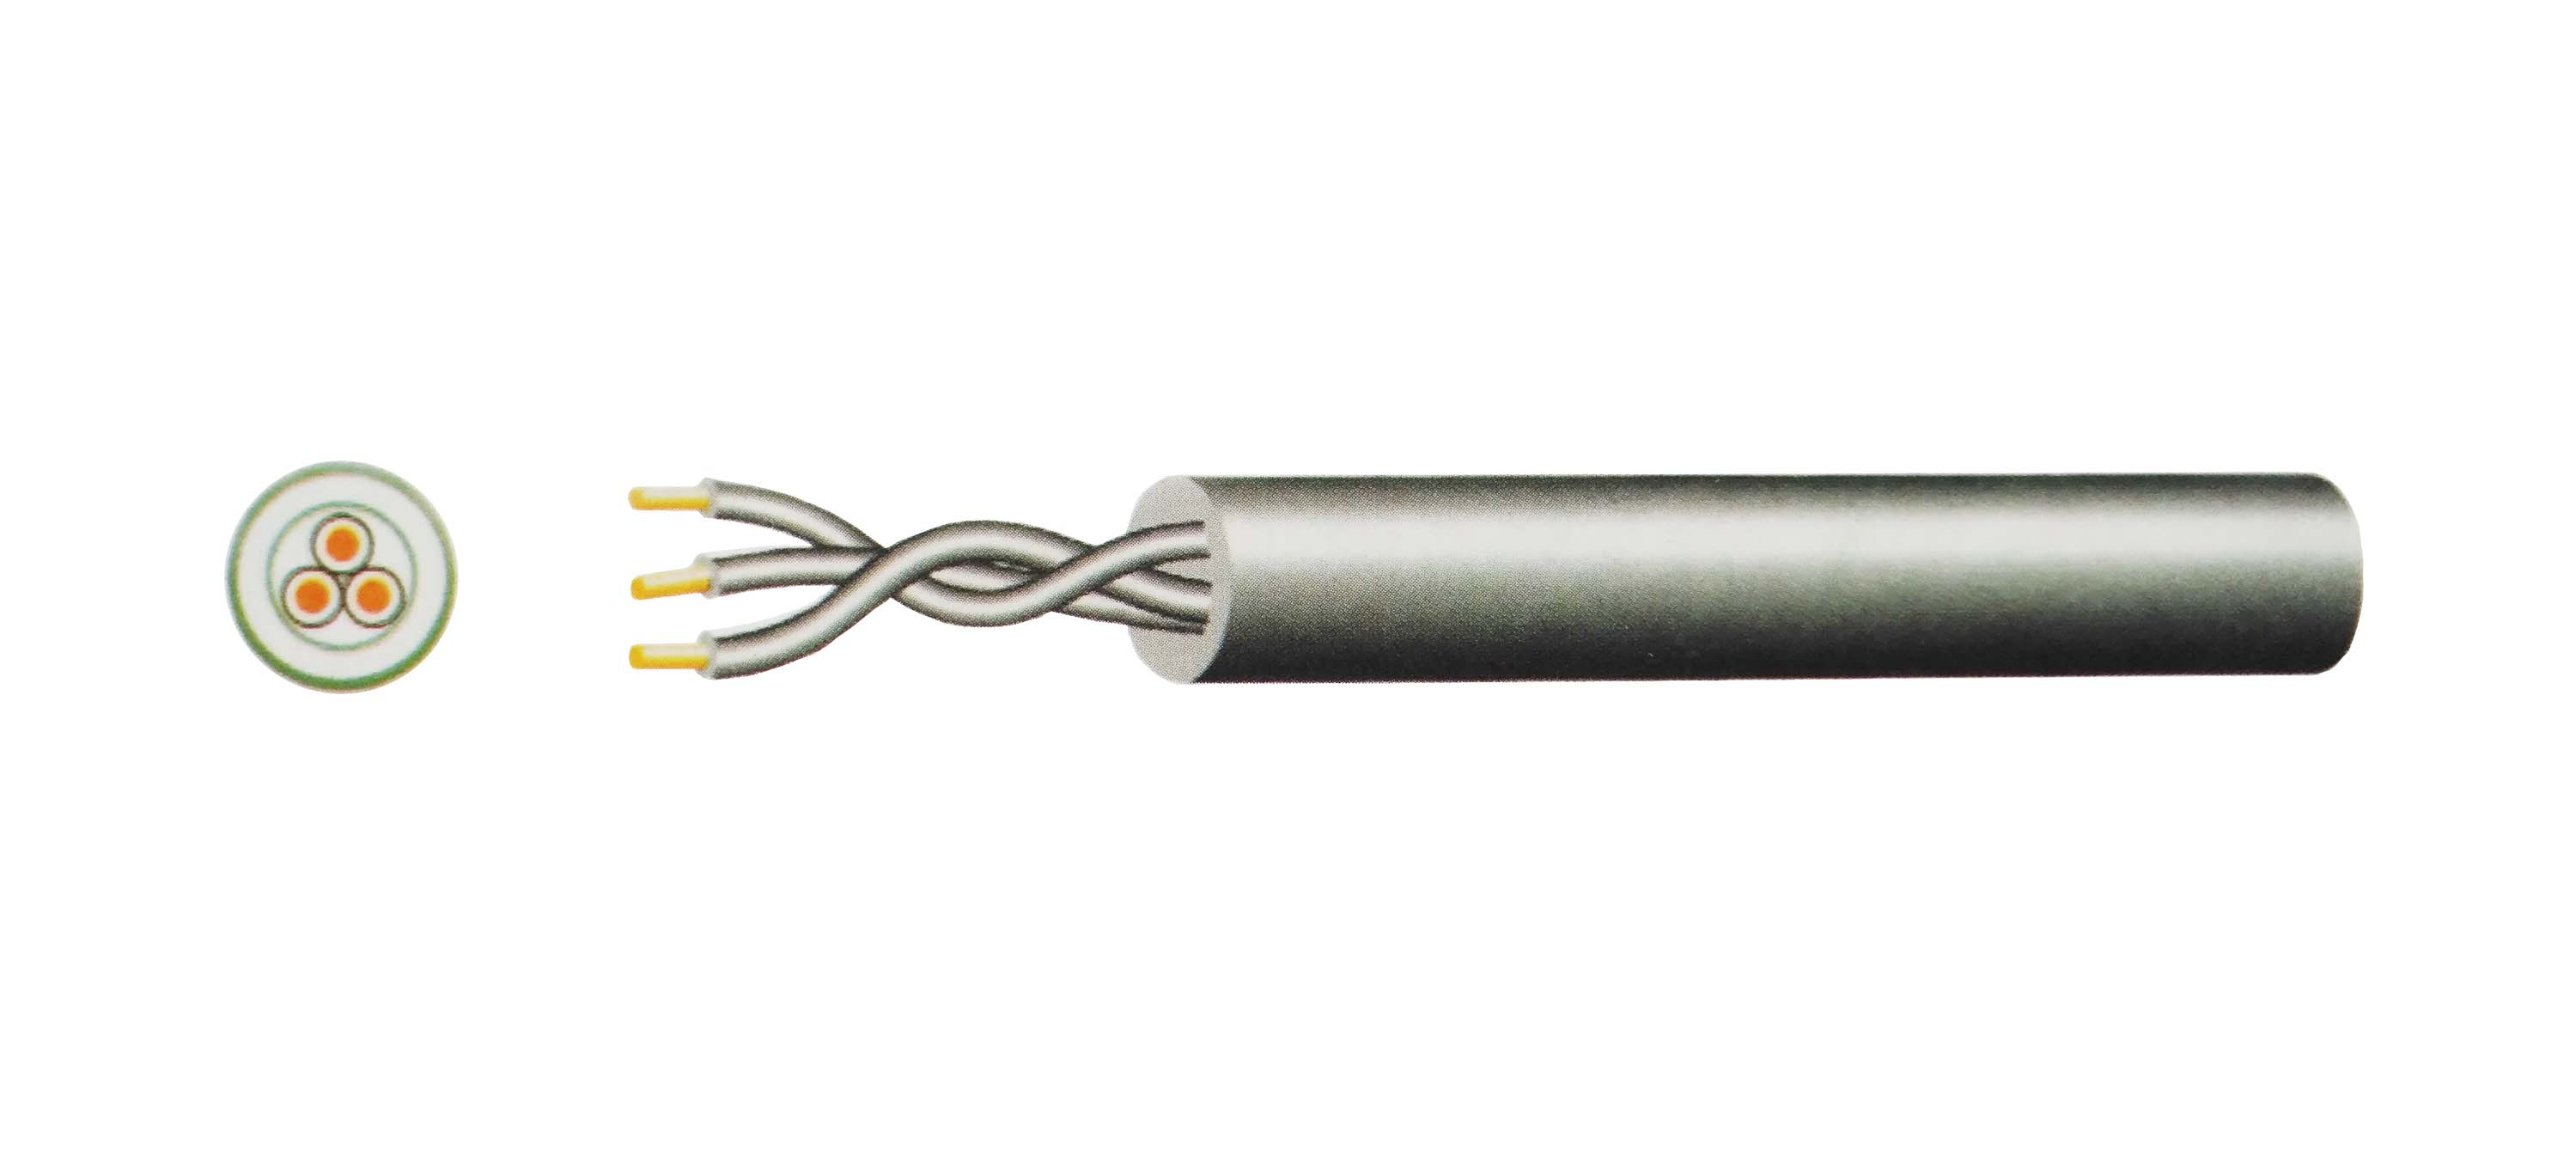 H05RR-F Rubber Power Cord